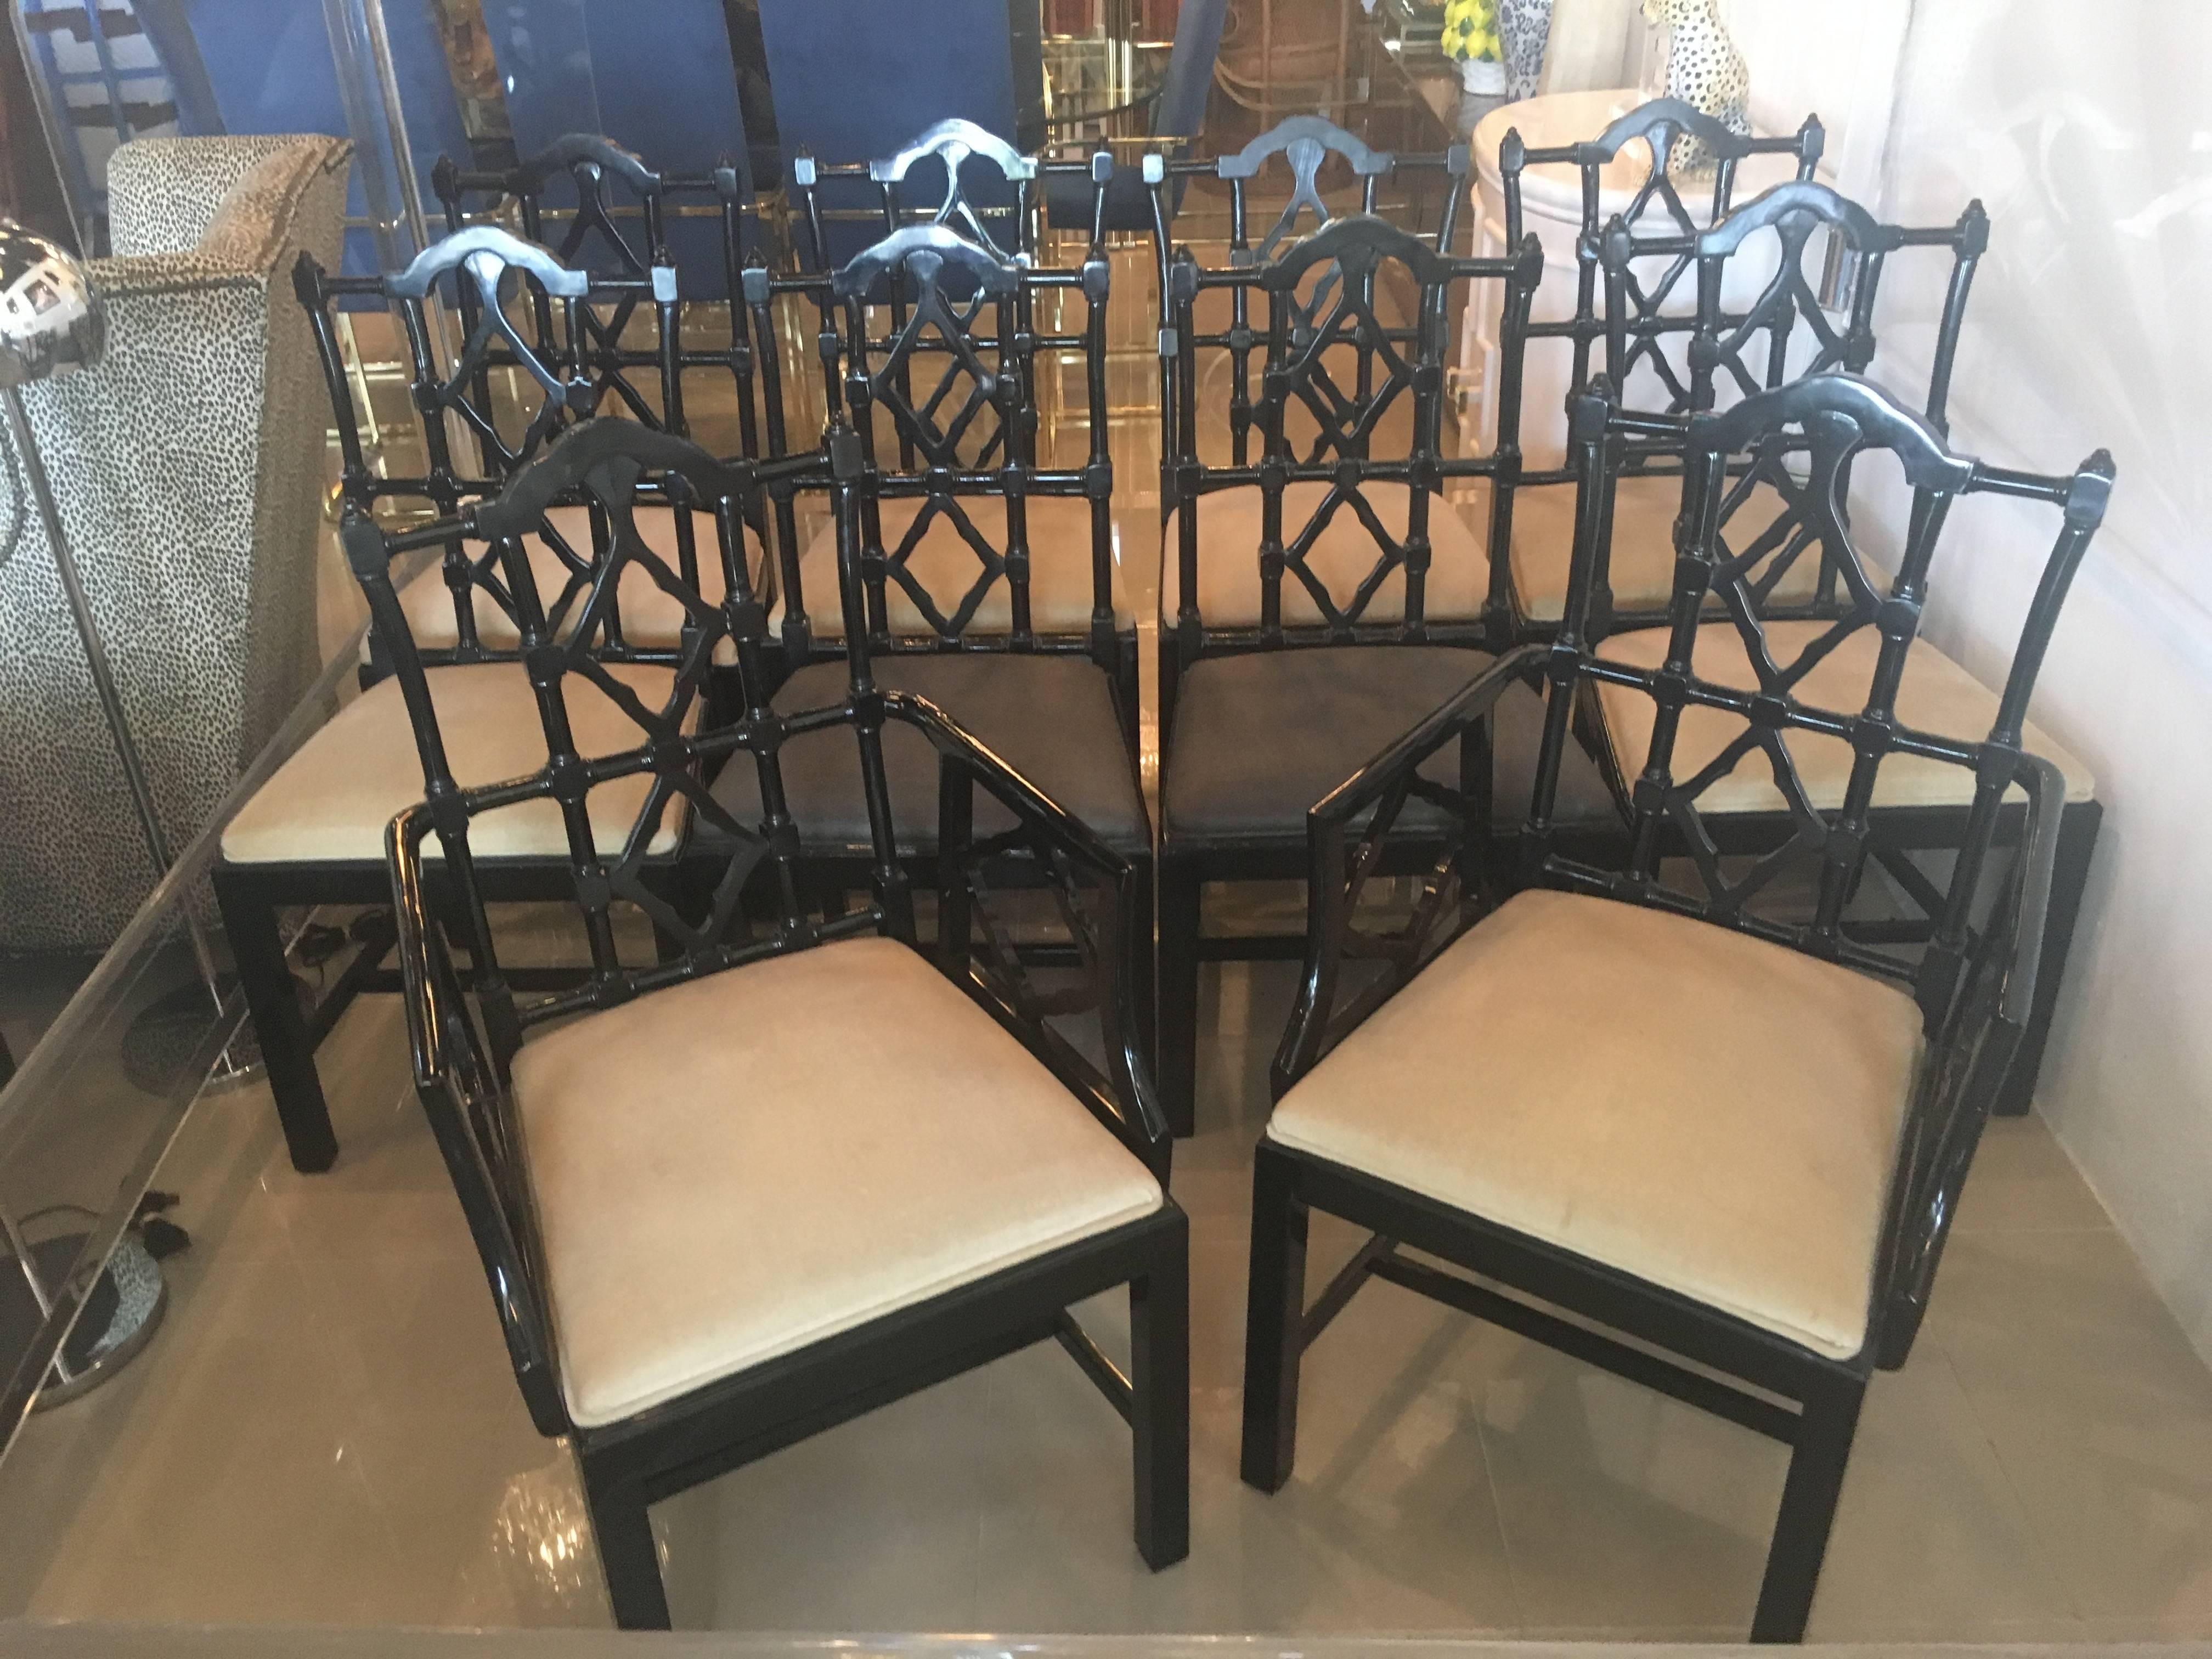 Mid-20th Century Set of Ten Chinese Chippendale Fretwork Dining Chairs Made in Spain Chinoiserie